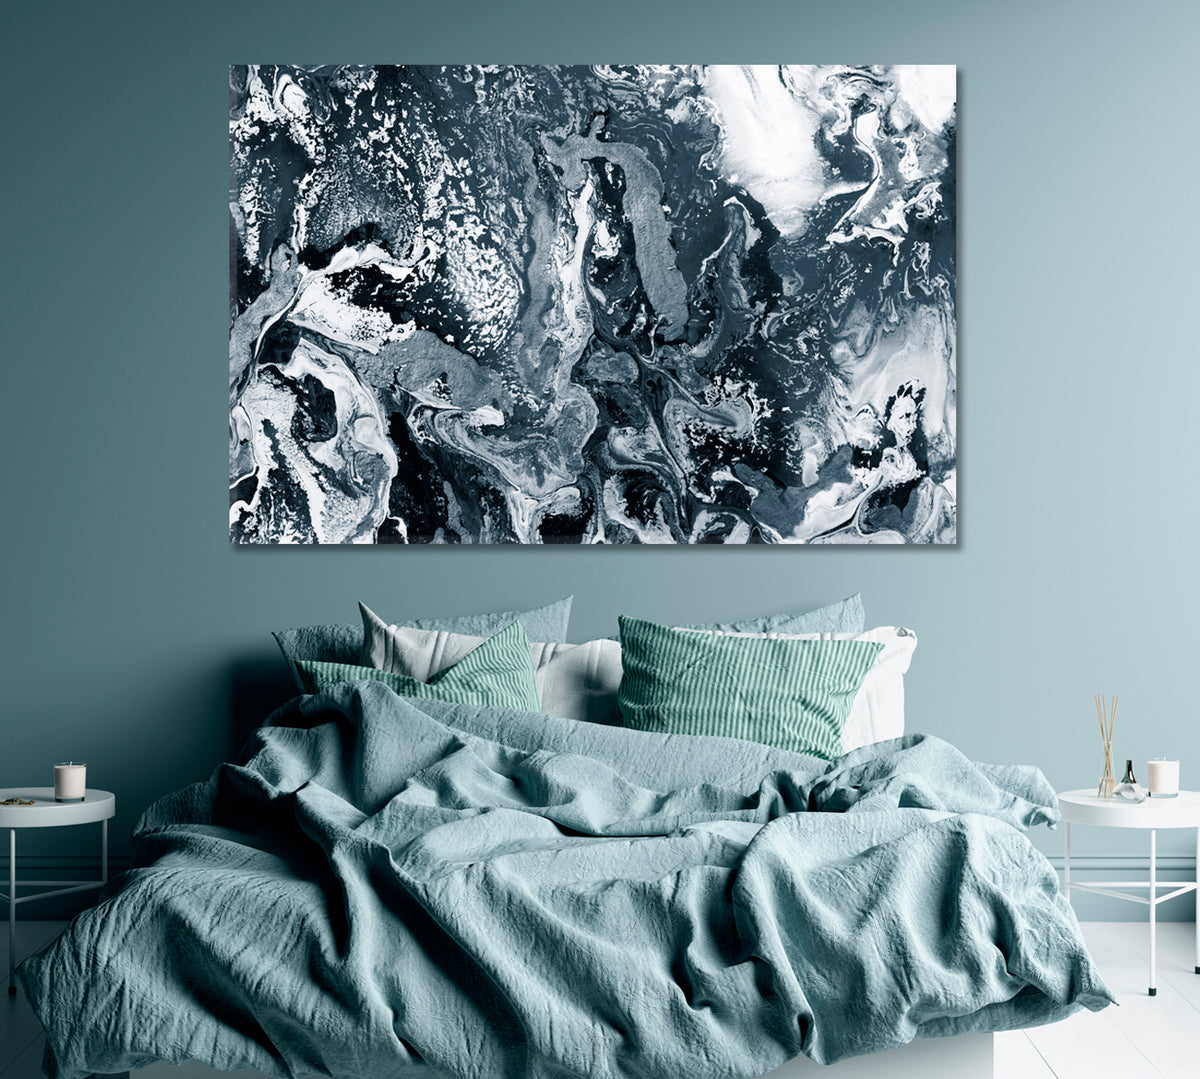 Abstract Grey Waves Canvas Print ArtLexy 1 Panel 24"x16" inches 